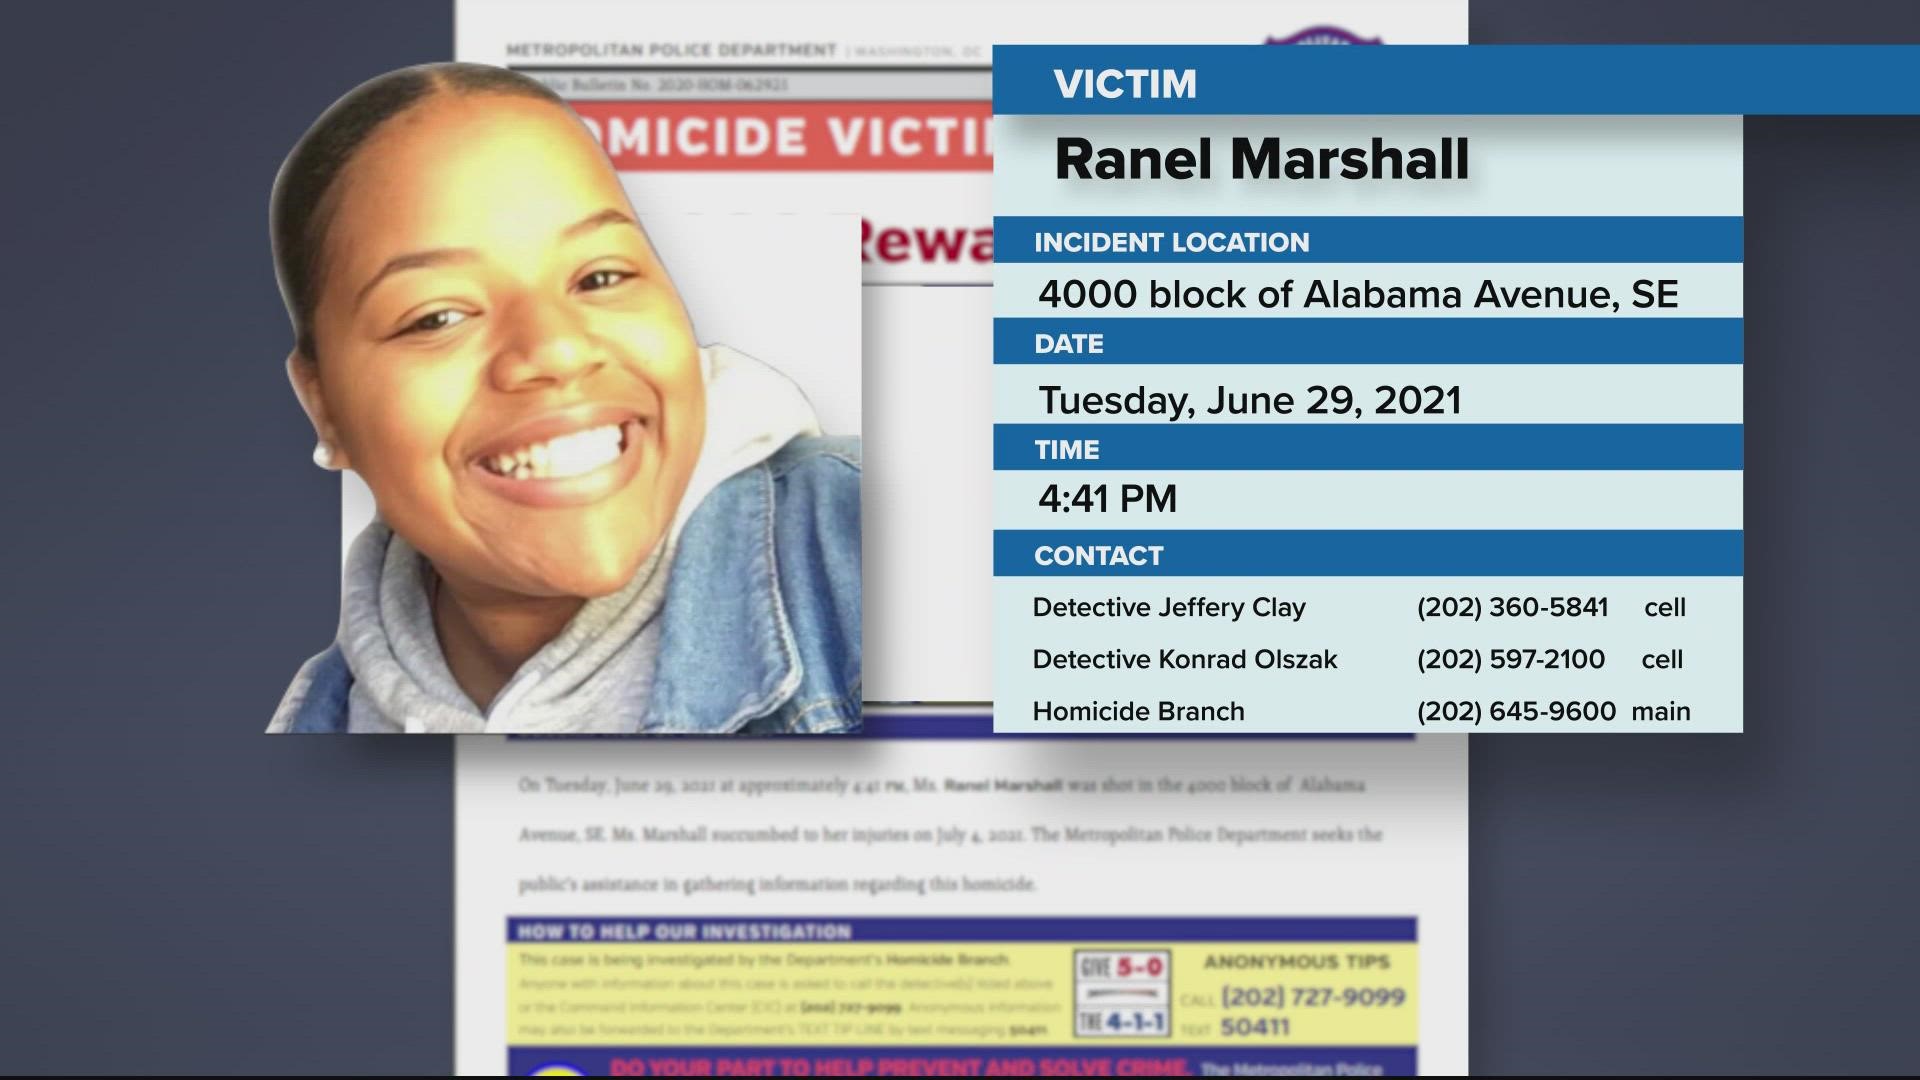 Ranel Marshall is among the growing number of unsolved homicide cases piling up on the desks of DC Police.